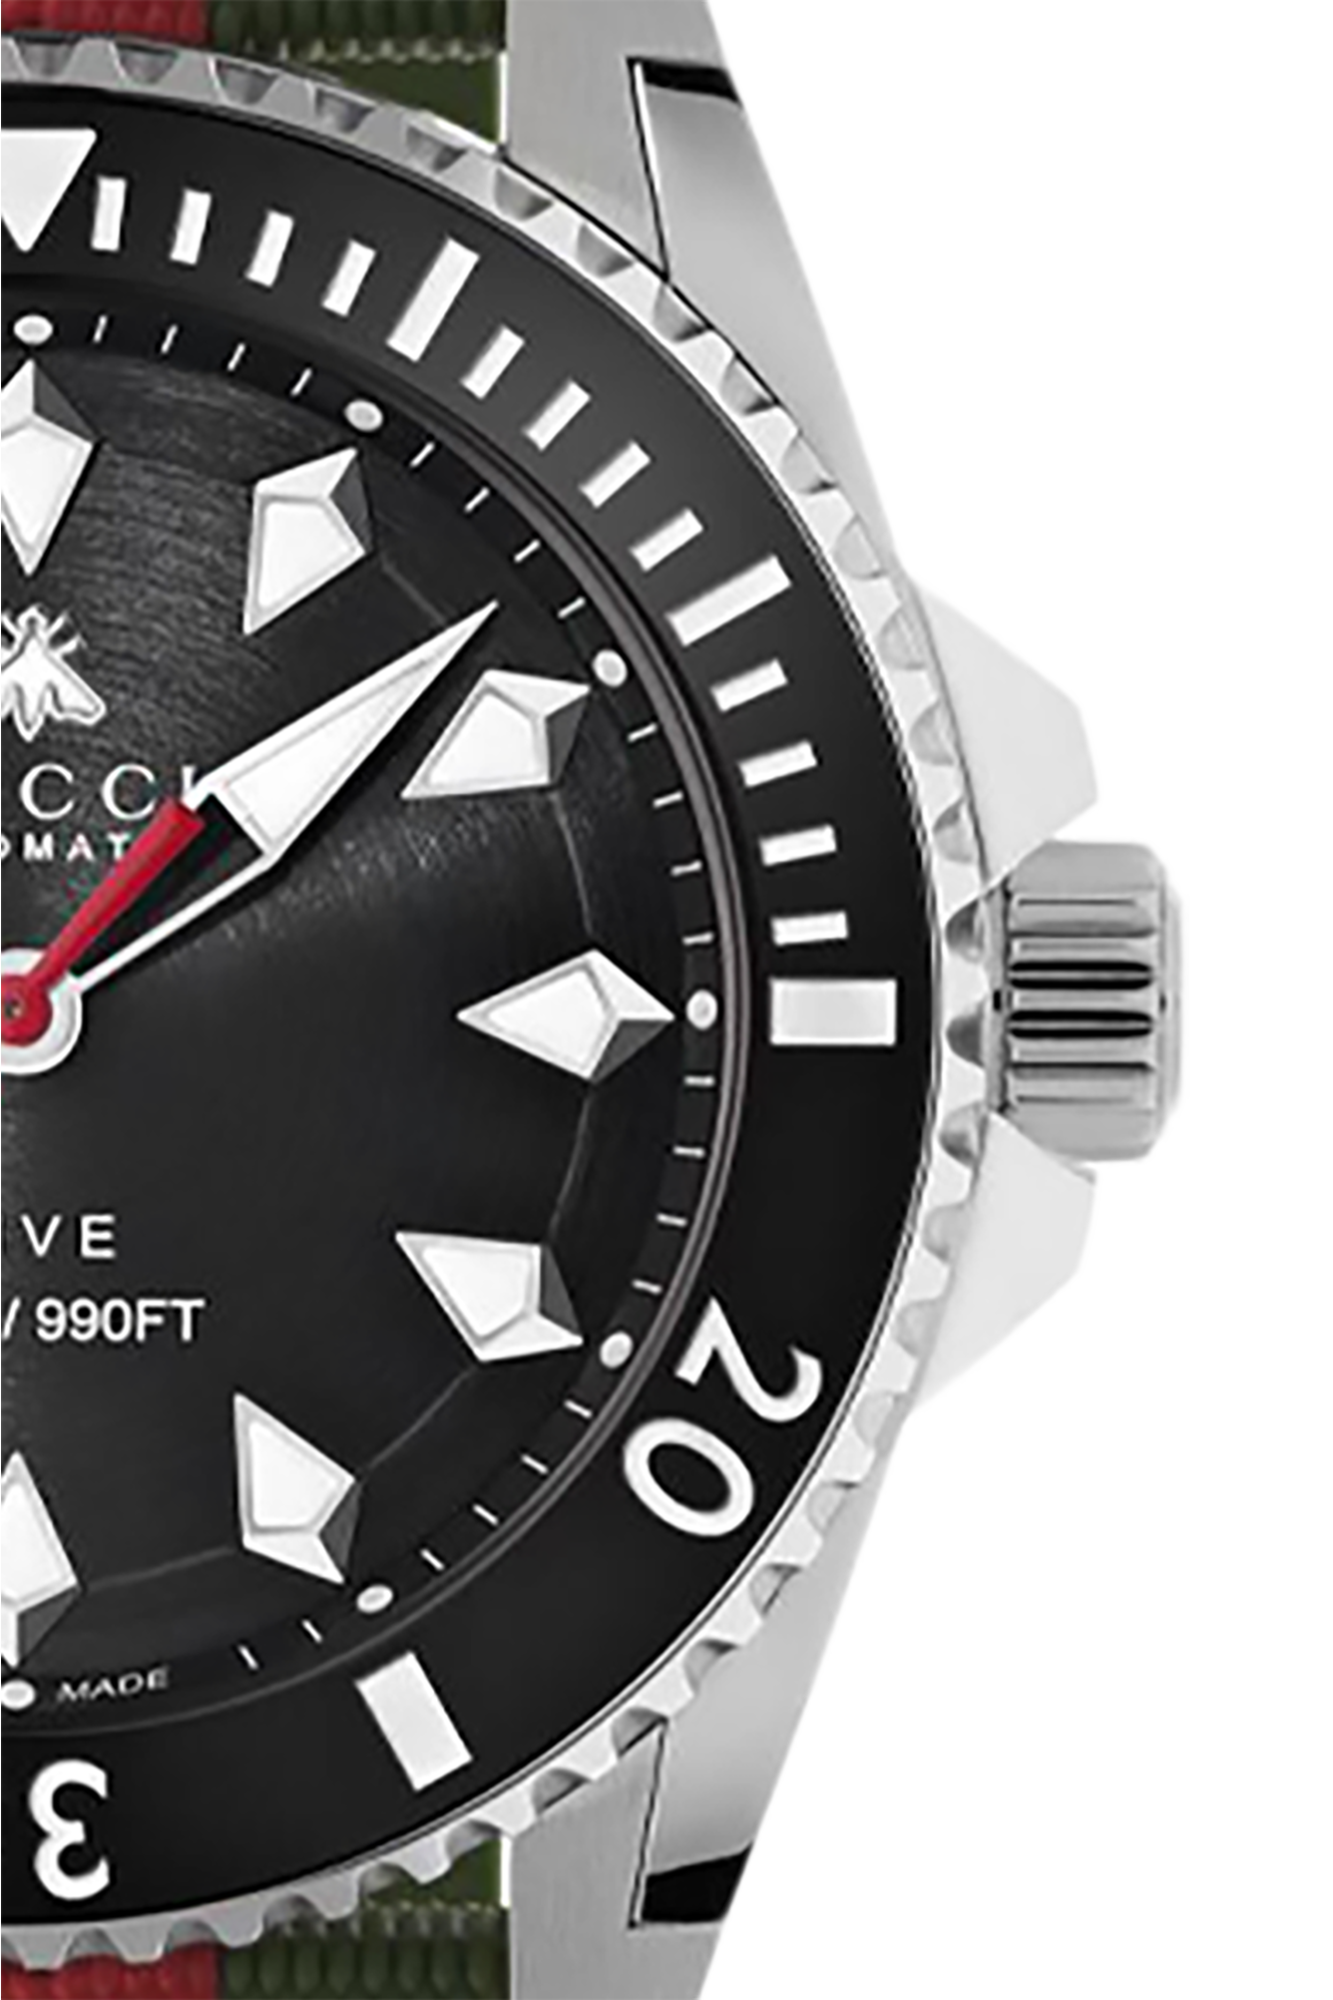 gucci knitted ‘gucci knitted Dive’ watch